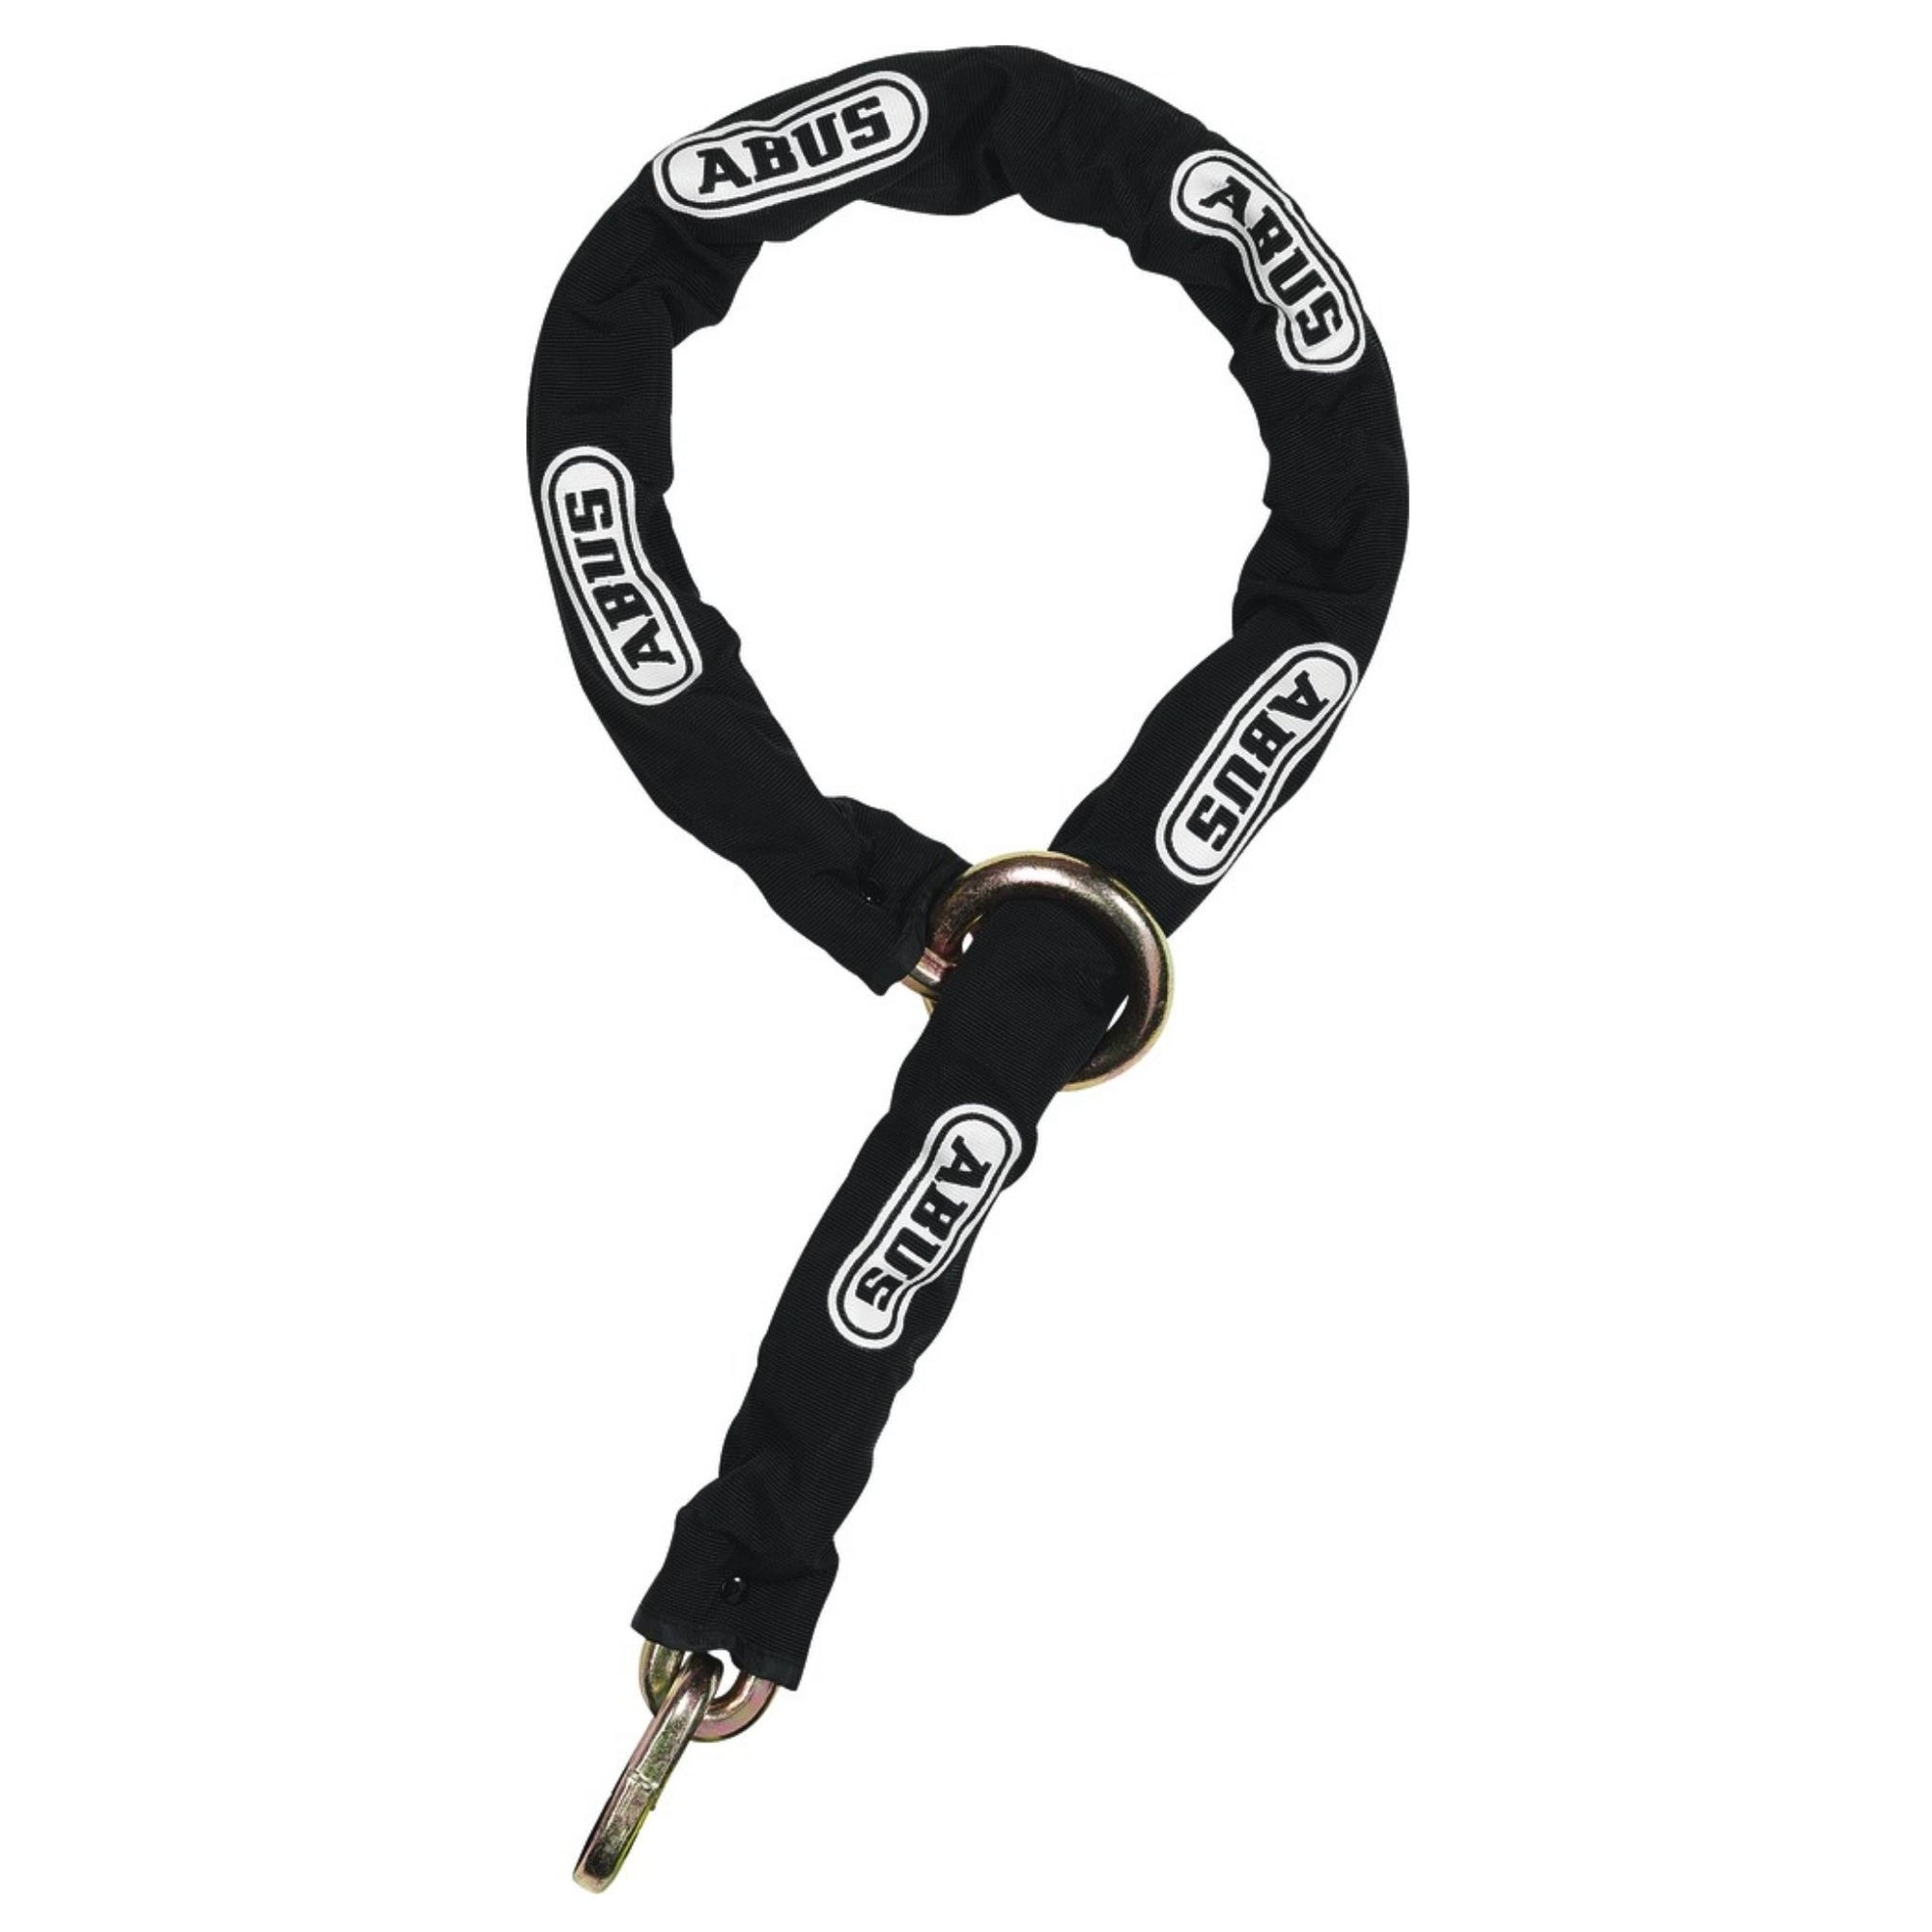 Abus 12KS Pre-Cut Loop Chains with Fitted Sleeve Available in 2.5', 4-Feet or 5-Foot Chain - The Lock Source